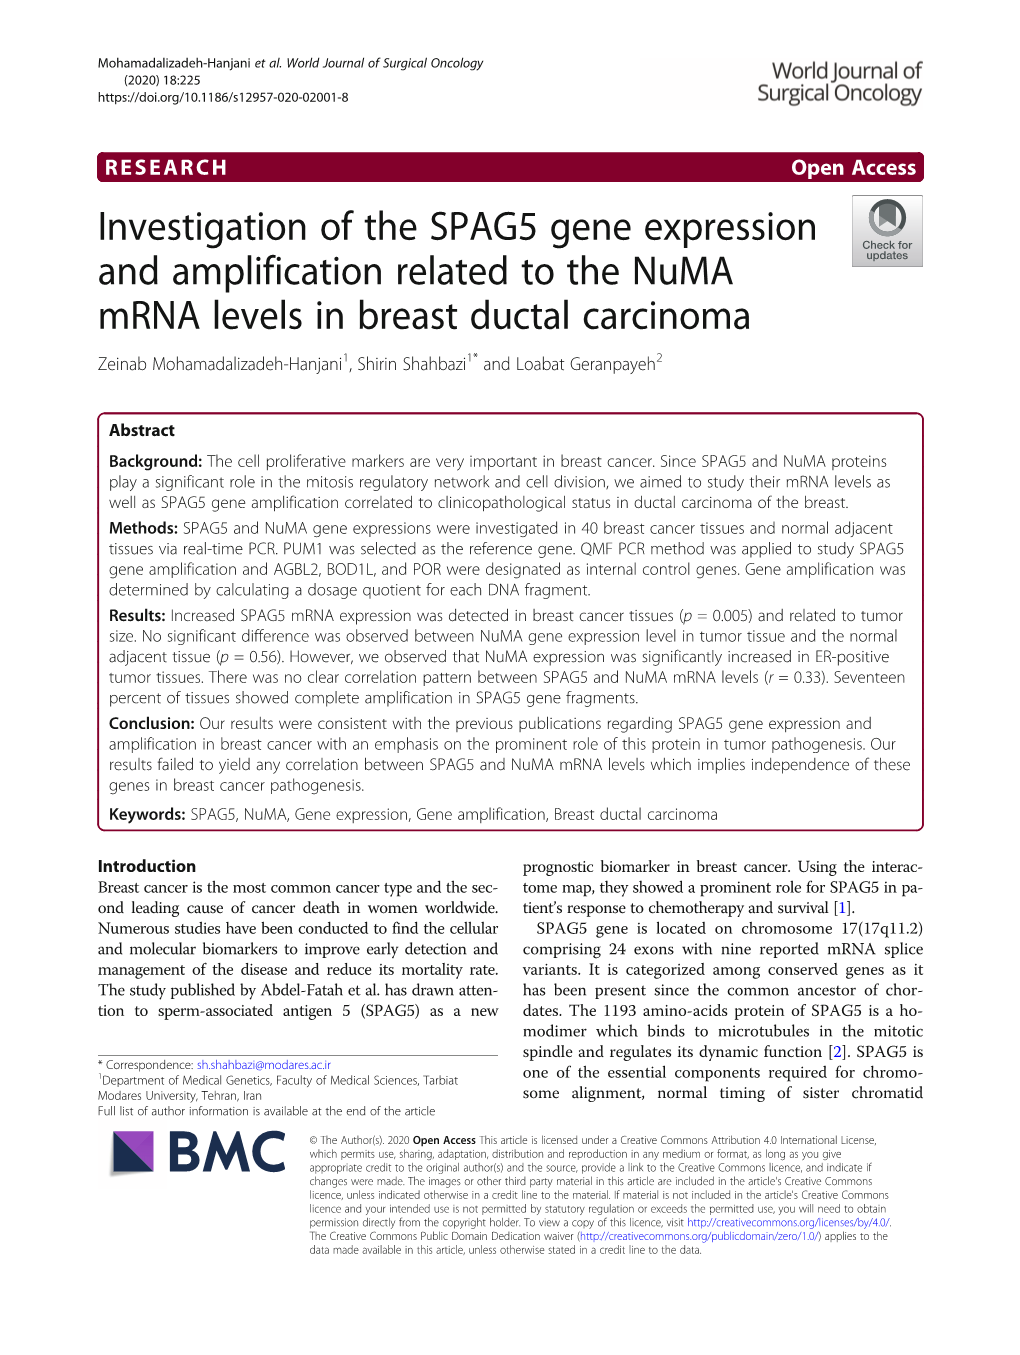 Investigation of the SPAG5 Gene Expression and Amplification